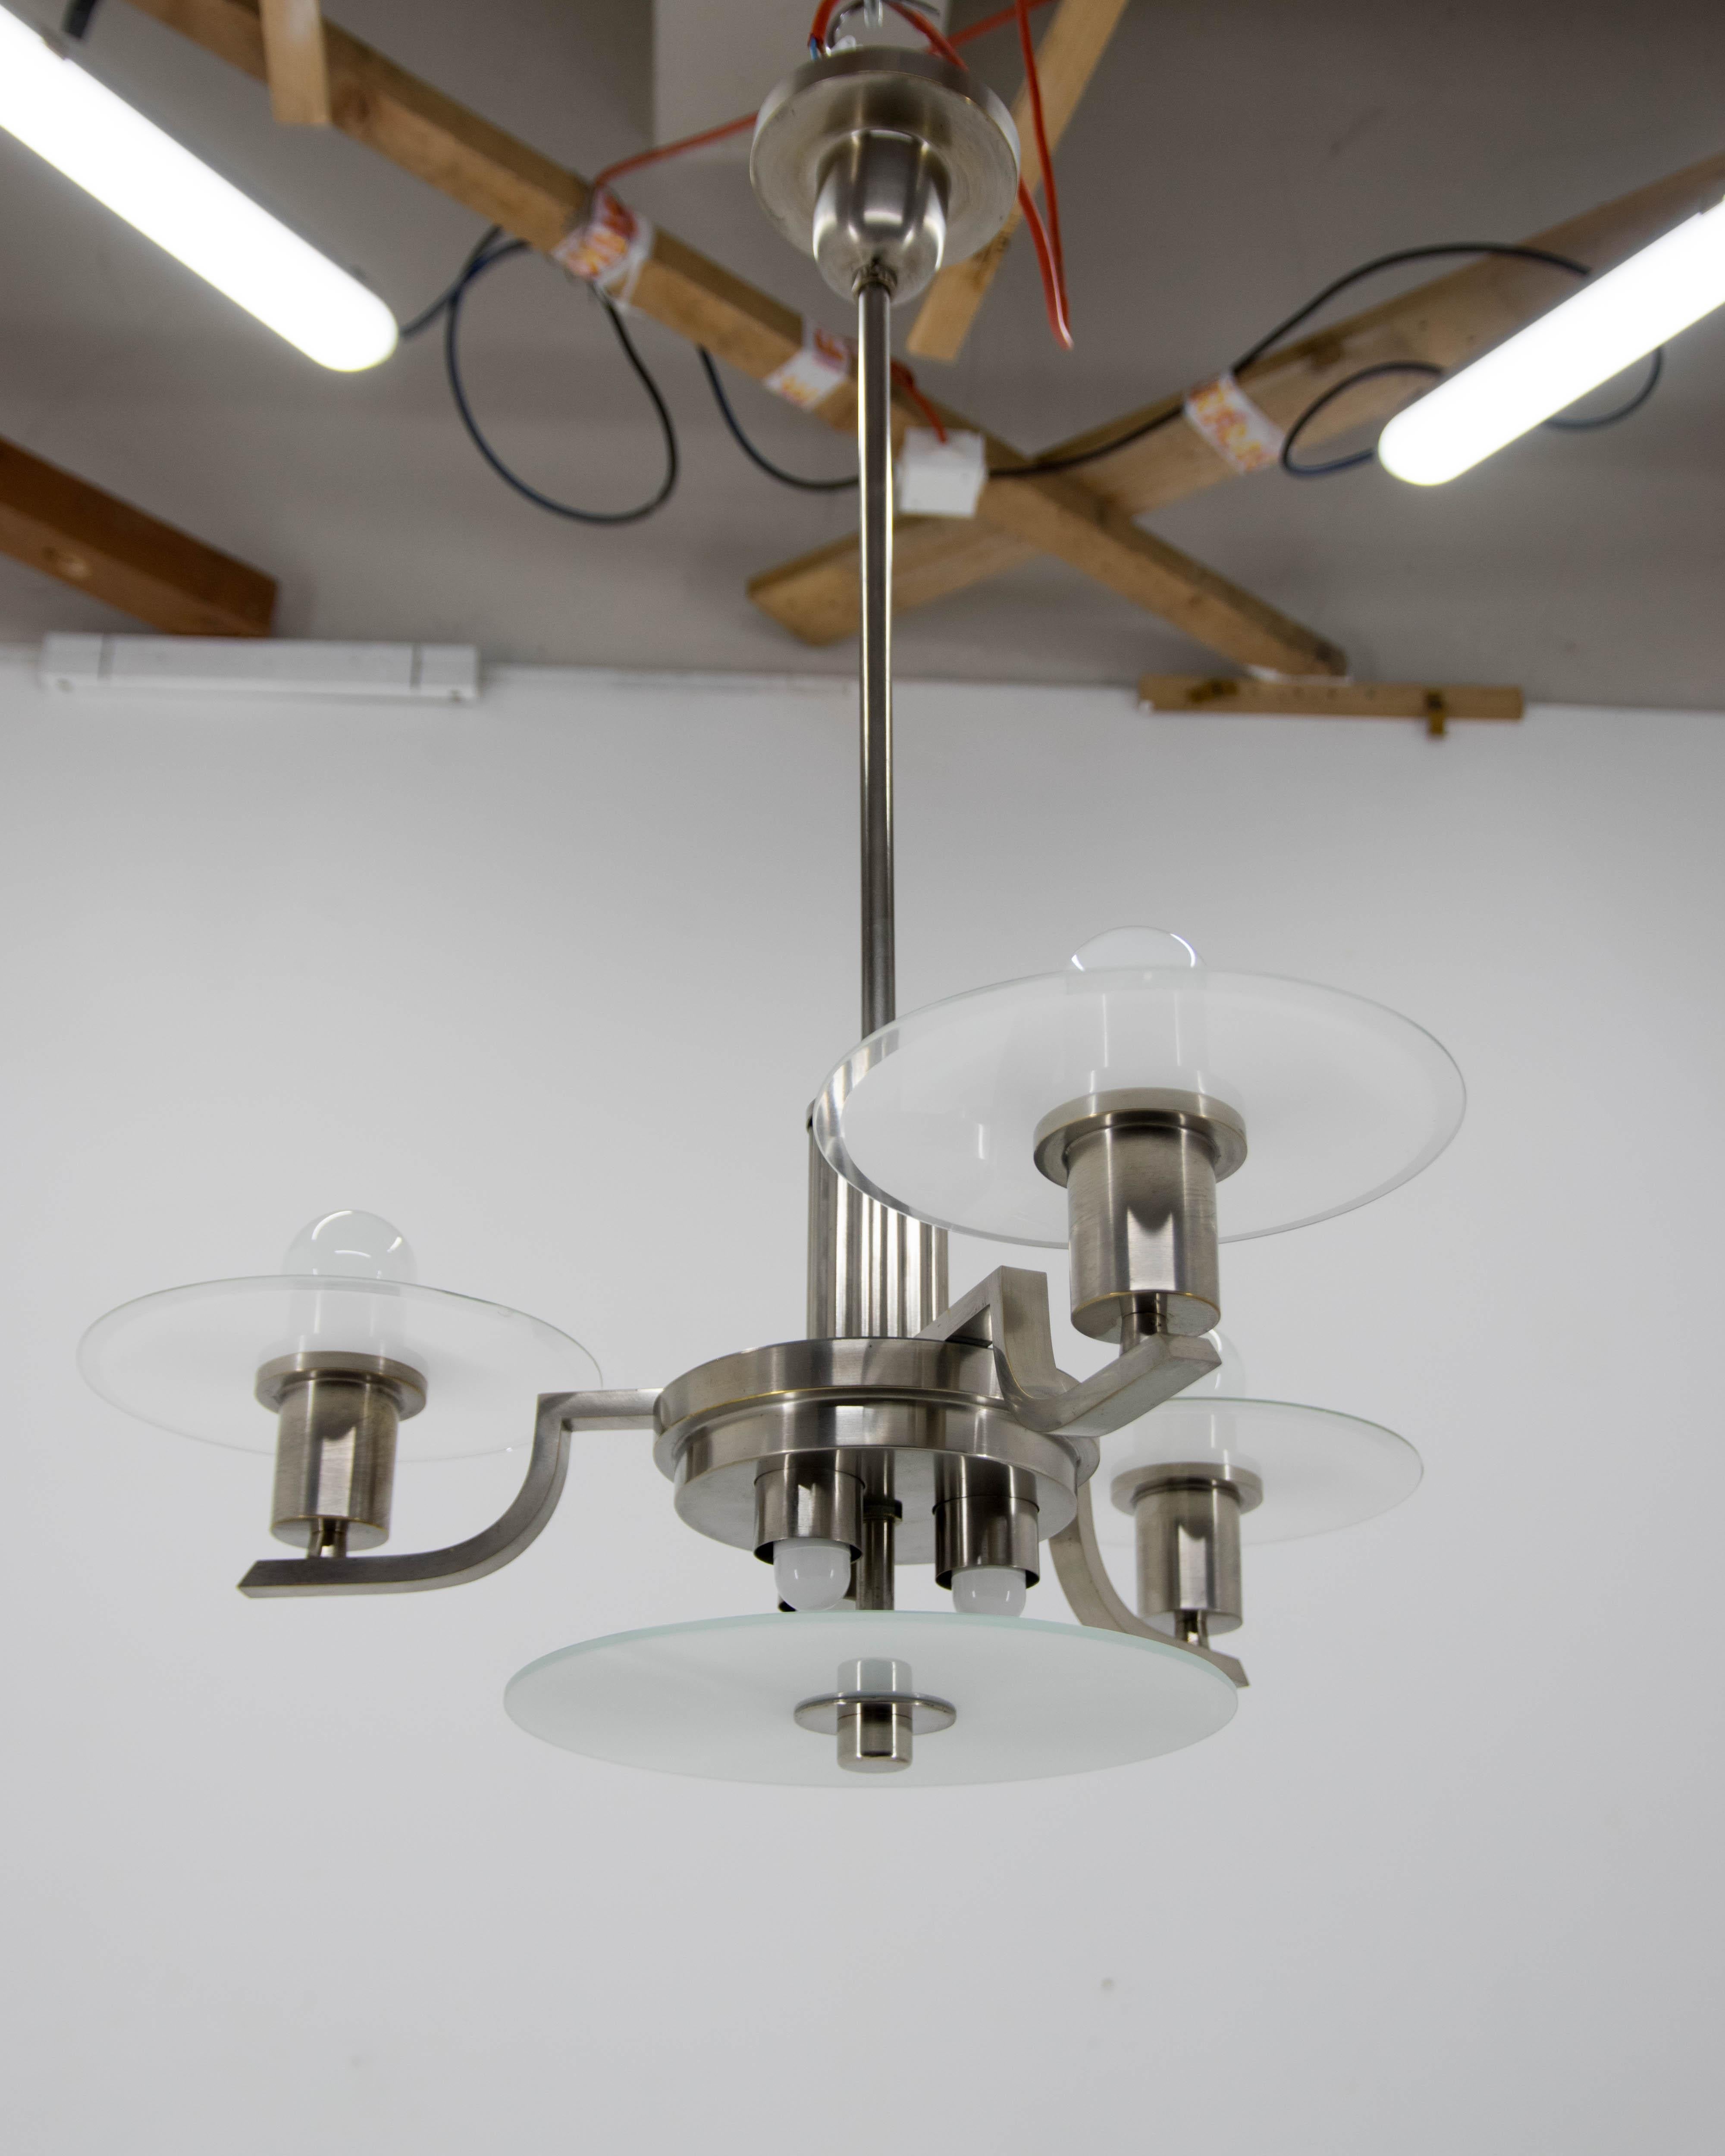 Machine Age chandelier made of nickel-plated brass and glass.
Restored, polished, rewired:
Two separate circuits - 3x25W (E12-E14 bulbs on the bottom part)
3x60W (E25-E27 bulbs on a top)
The different colors of the top and bottom part are due to